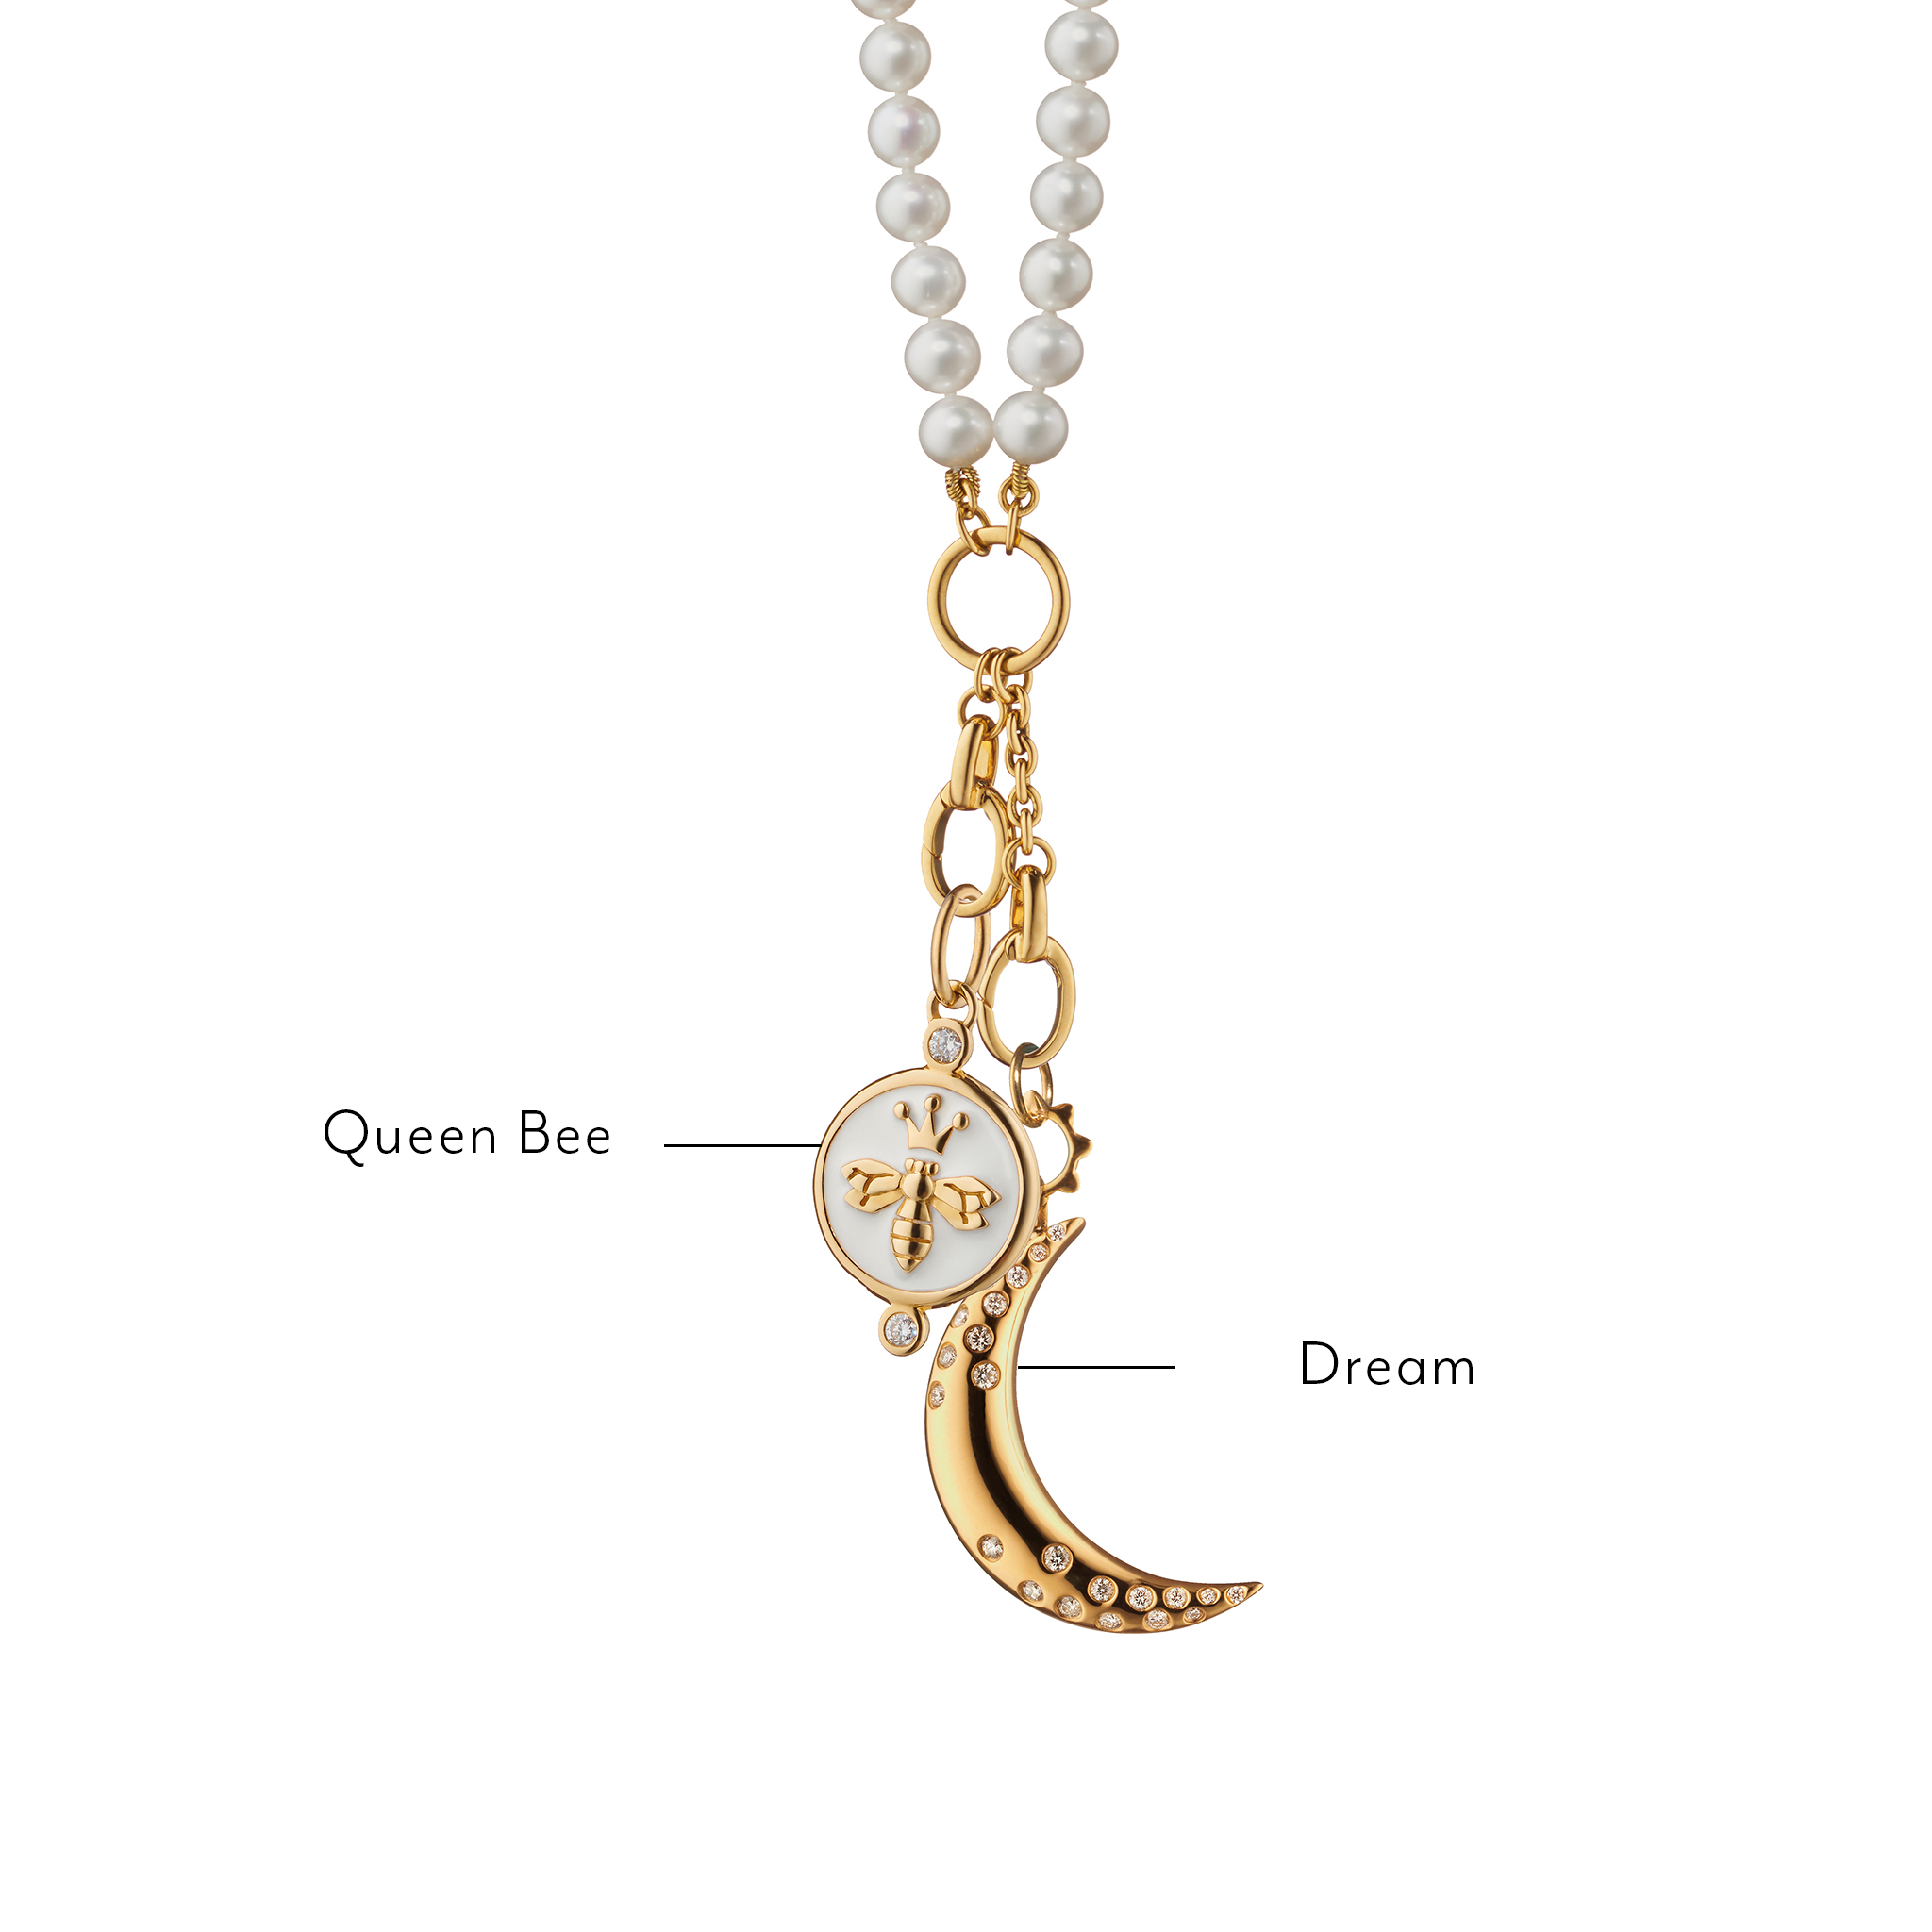 Queen Bee and Dream Moon Necklace